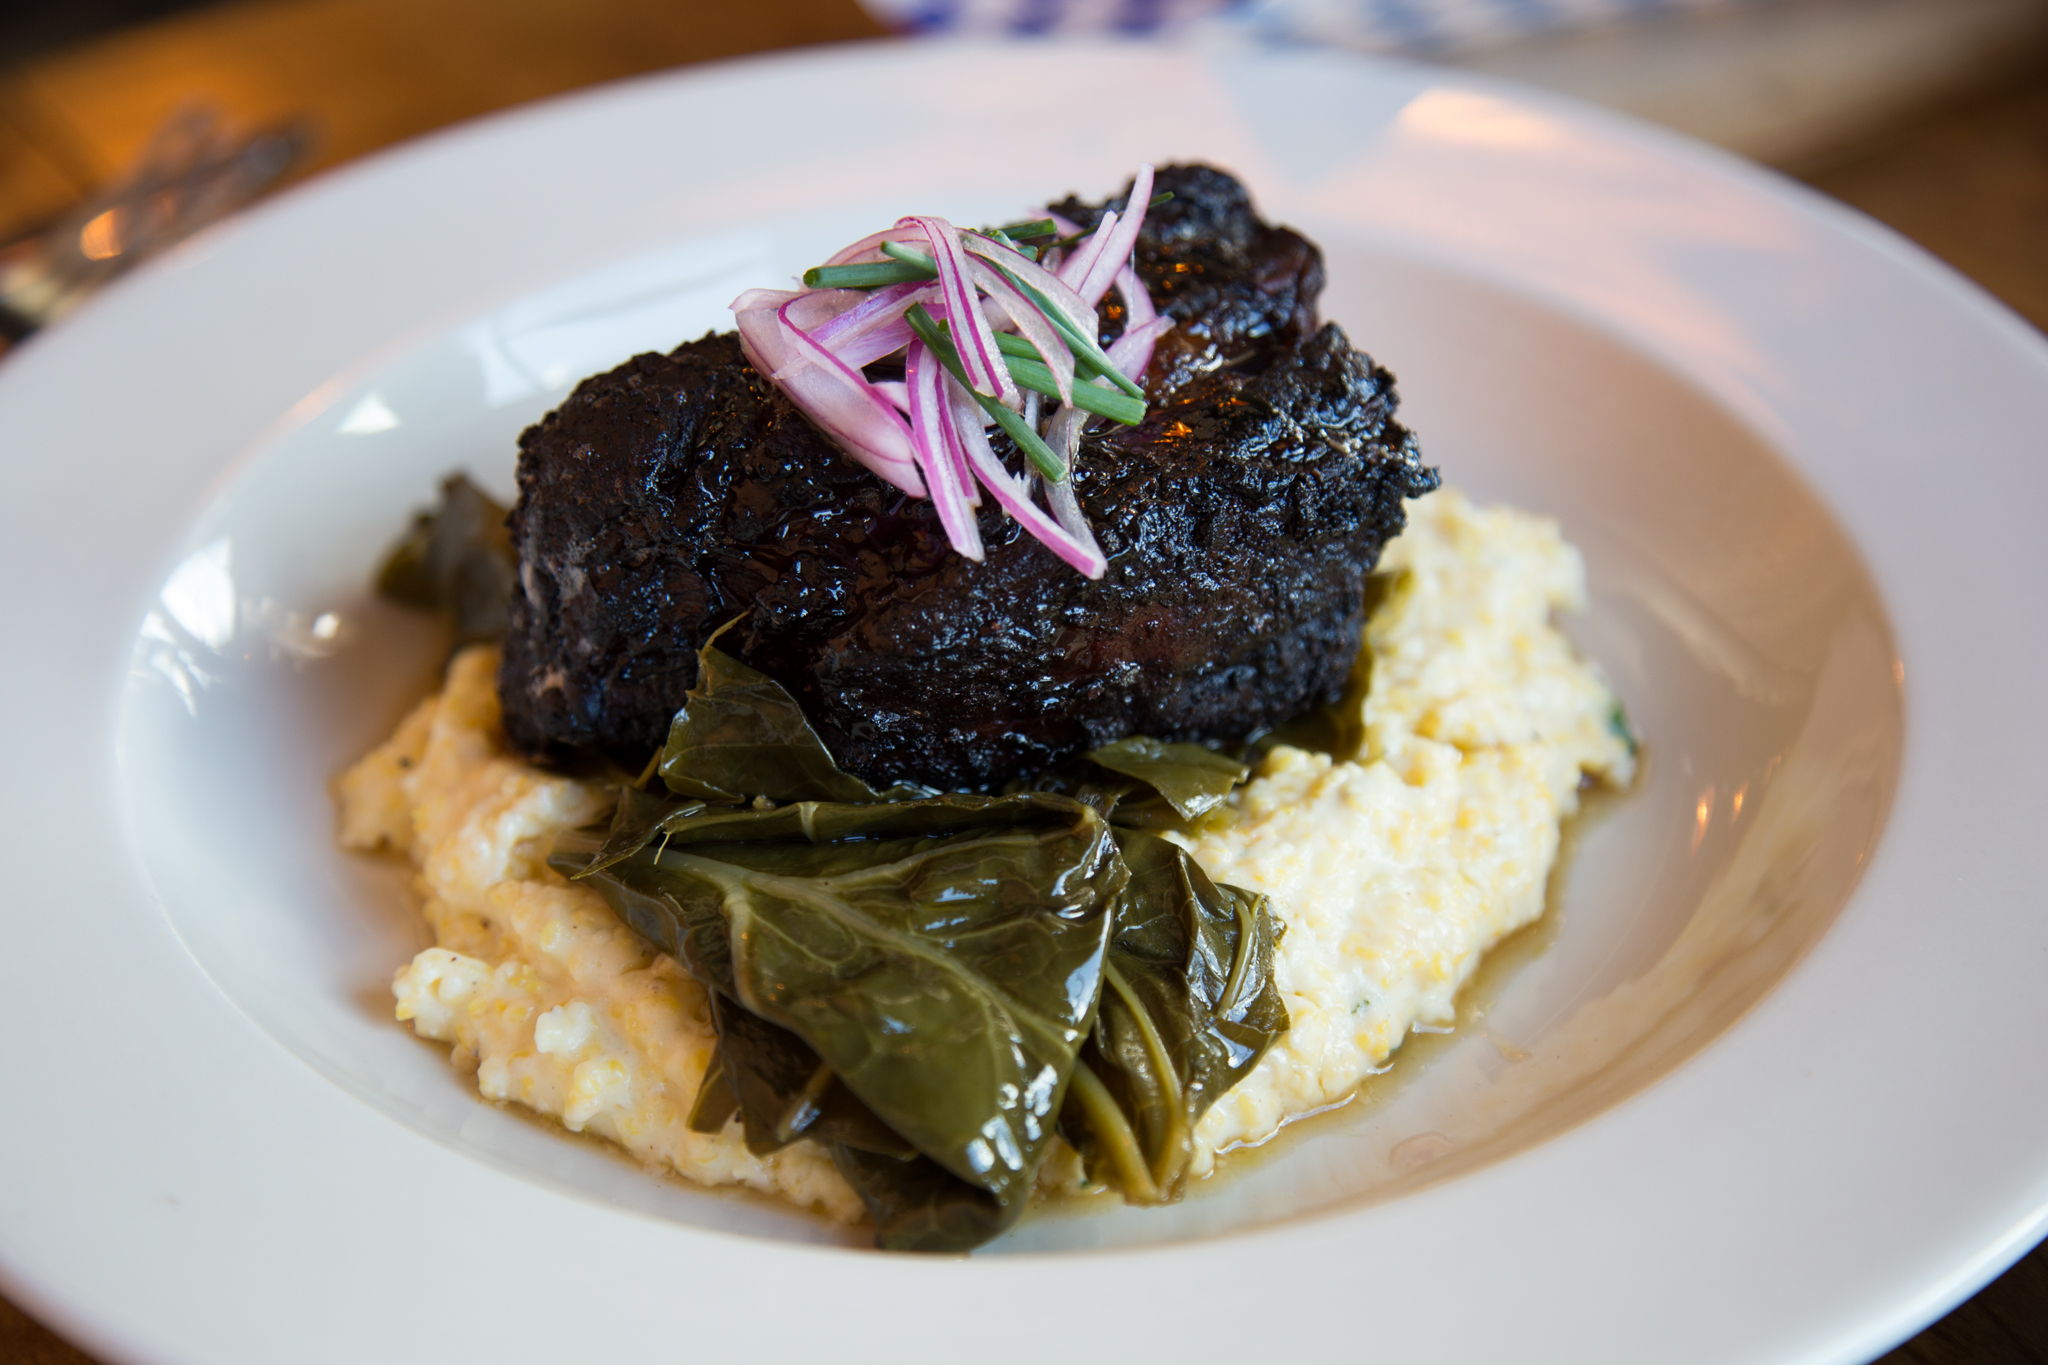 Patrick Feges' beef belly burnt ends at Southern Goods. Photo by Becca Wright